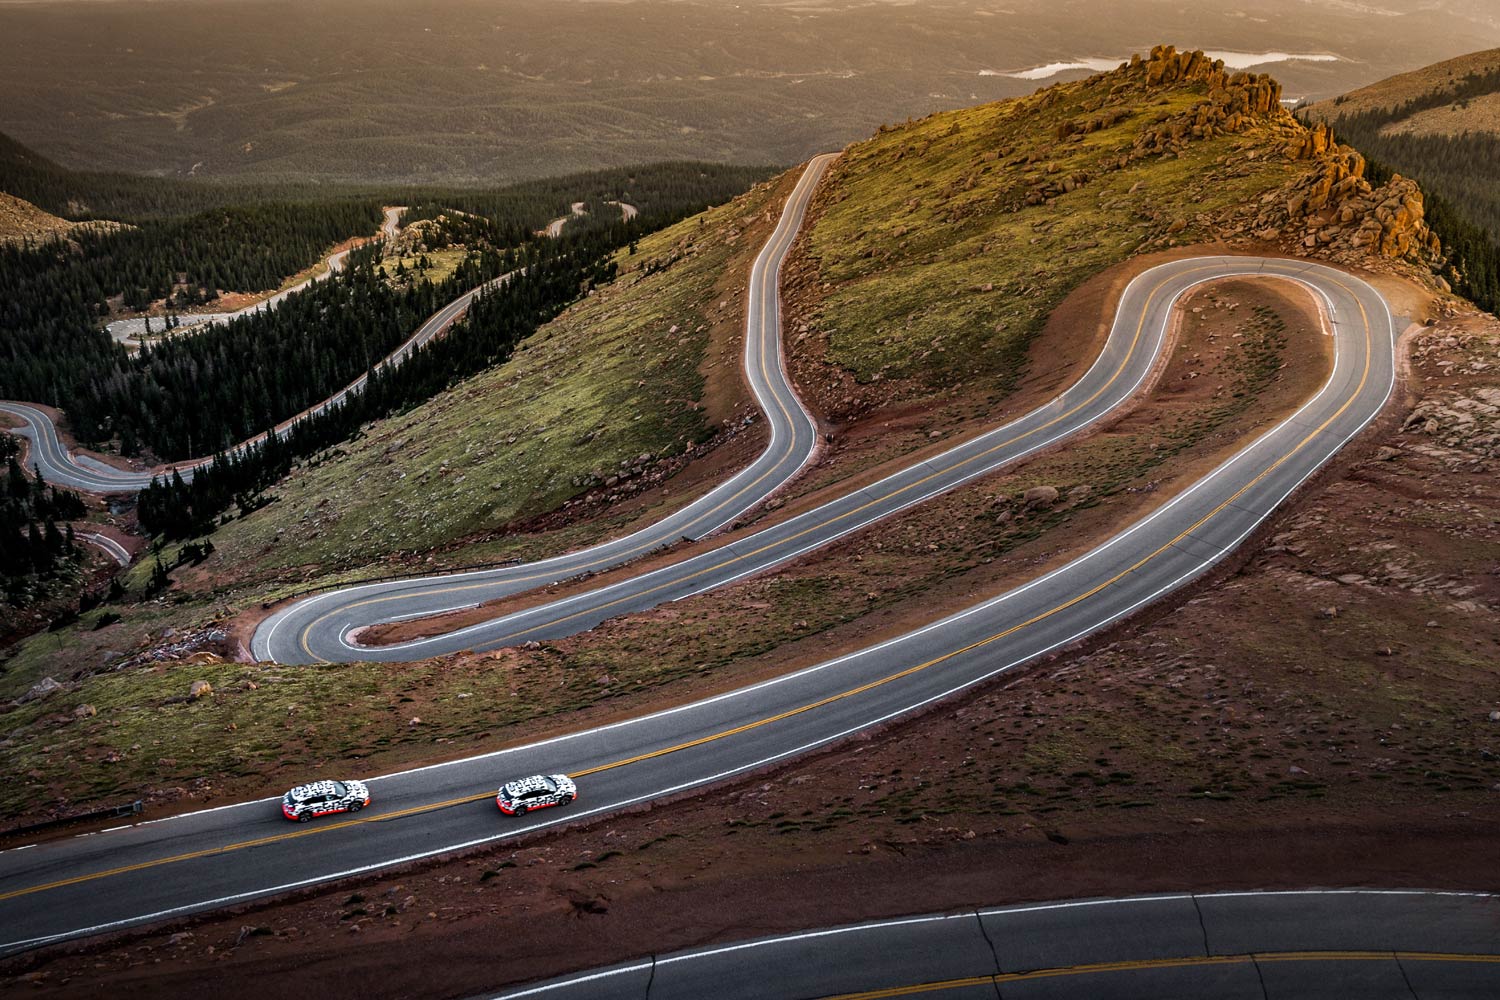 Aerial view of some twists and turns on the Pikes Peak race course